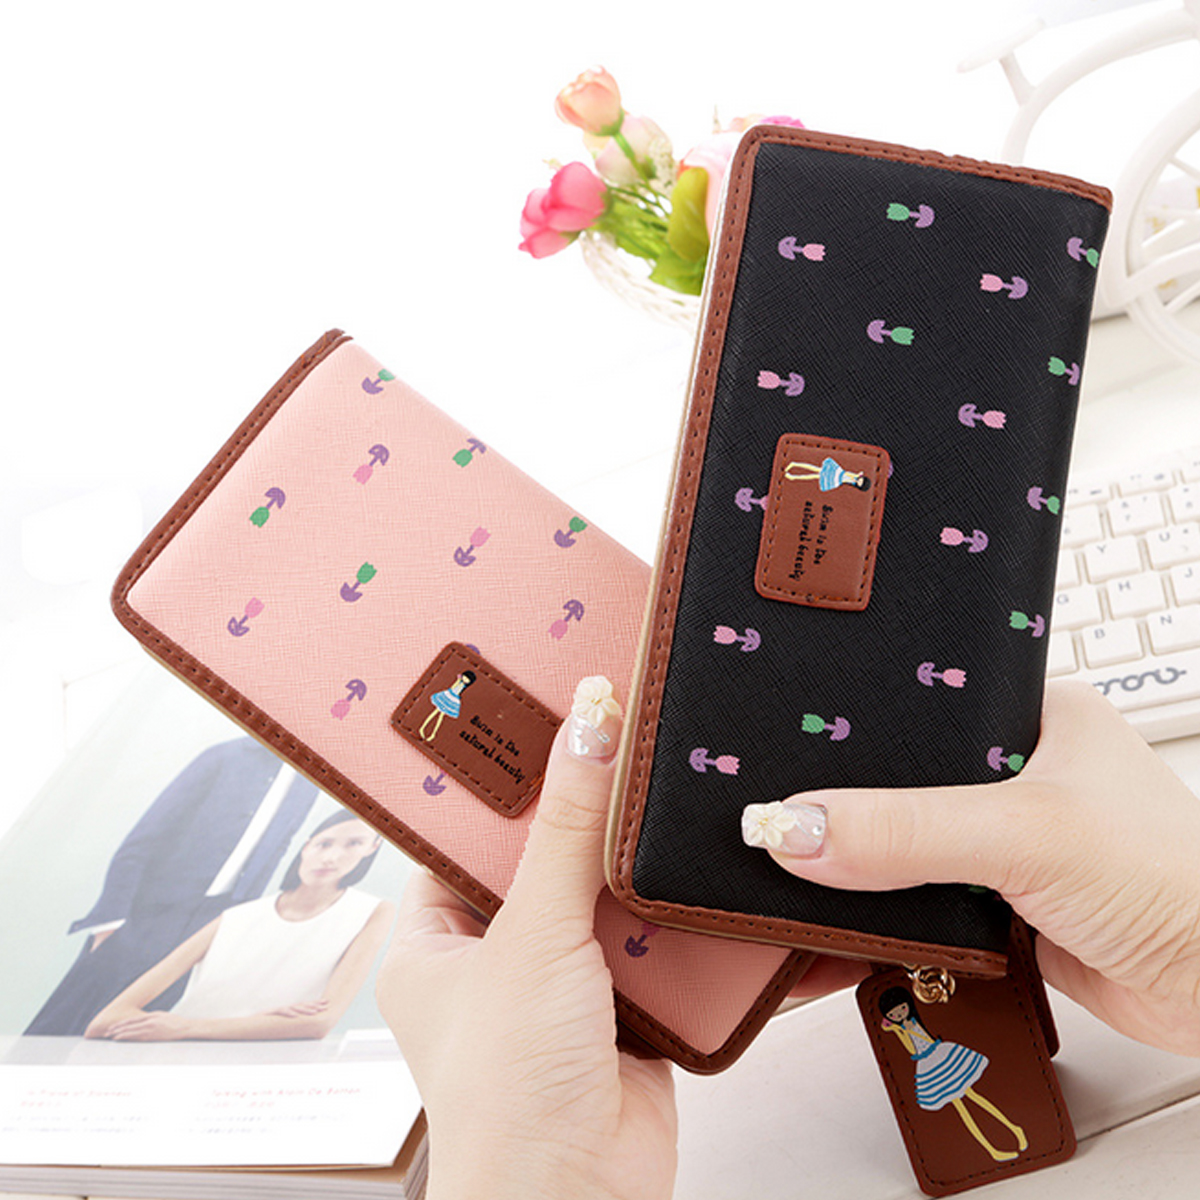 Fashion-Sweet-Girl-Leather-Women-Long-Wallet-Phone-Case-Card-Holder-for-iPhone-X-Samsung-S8-Xiaomi-6-1239355